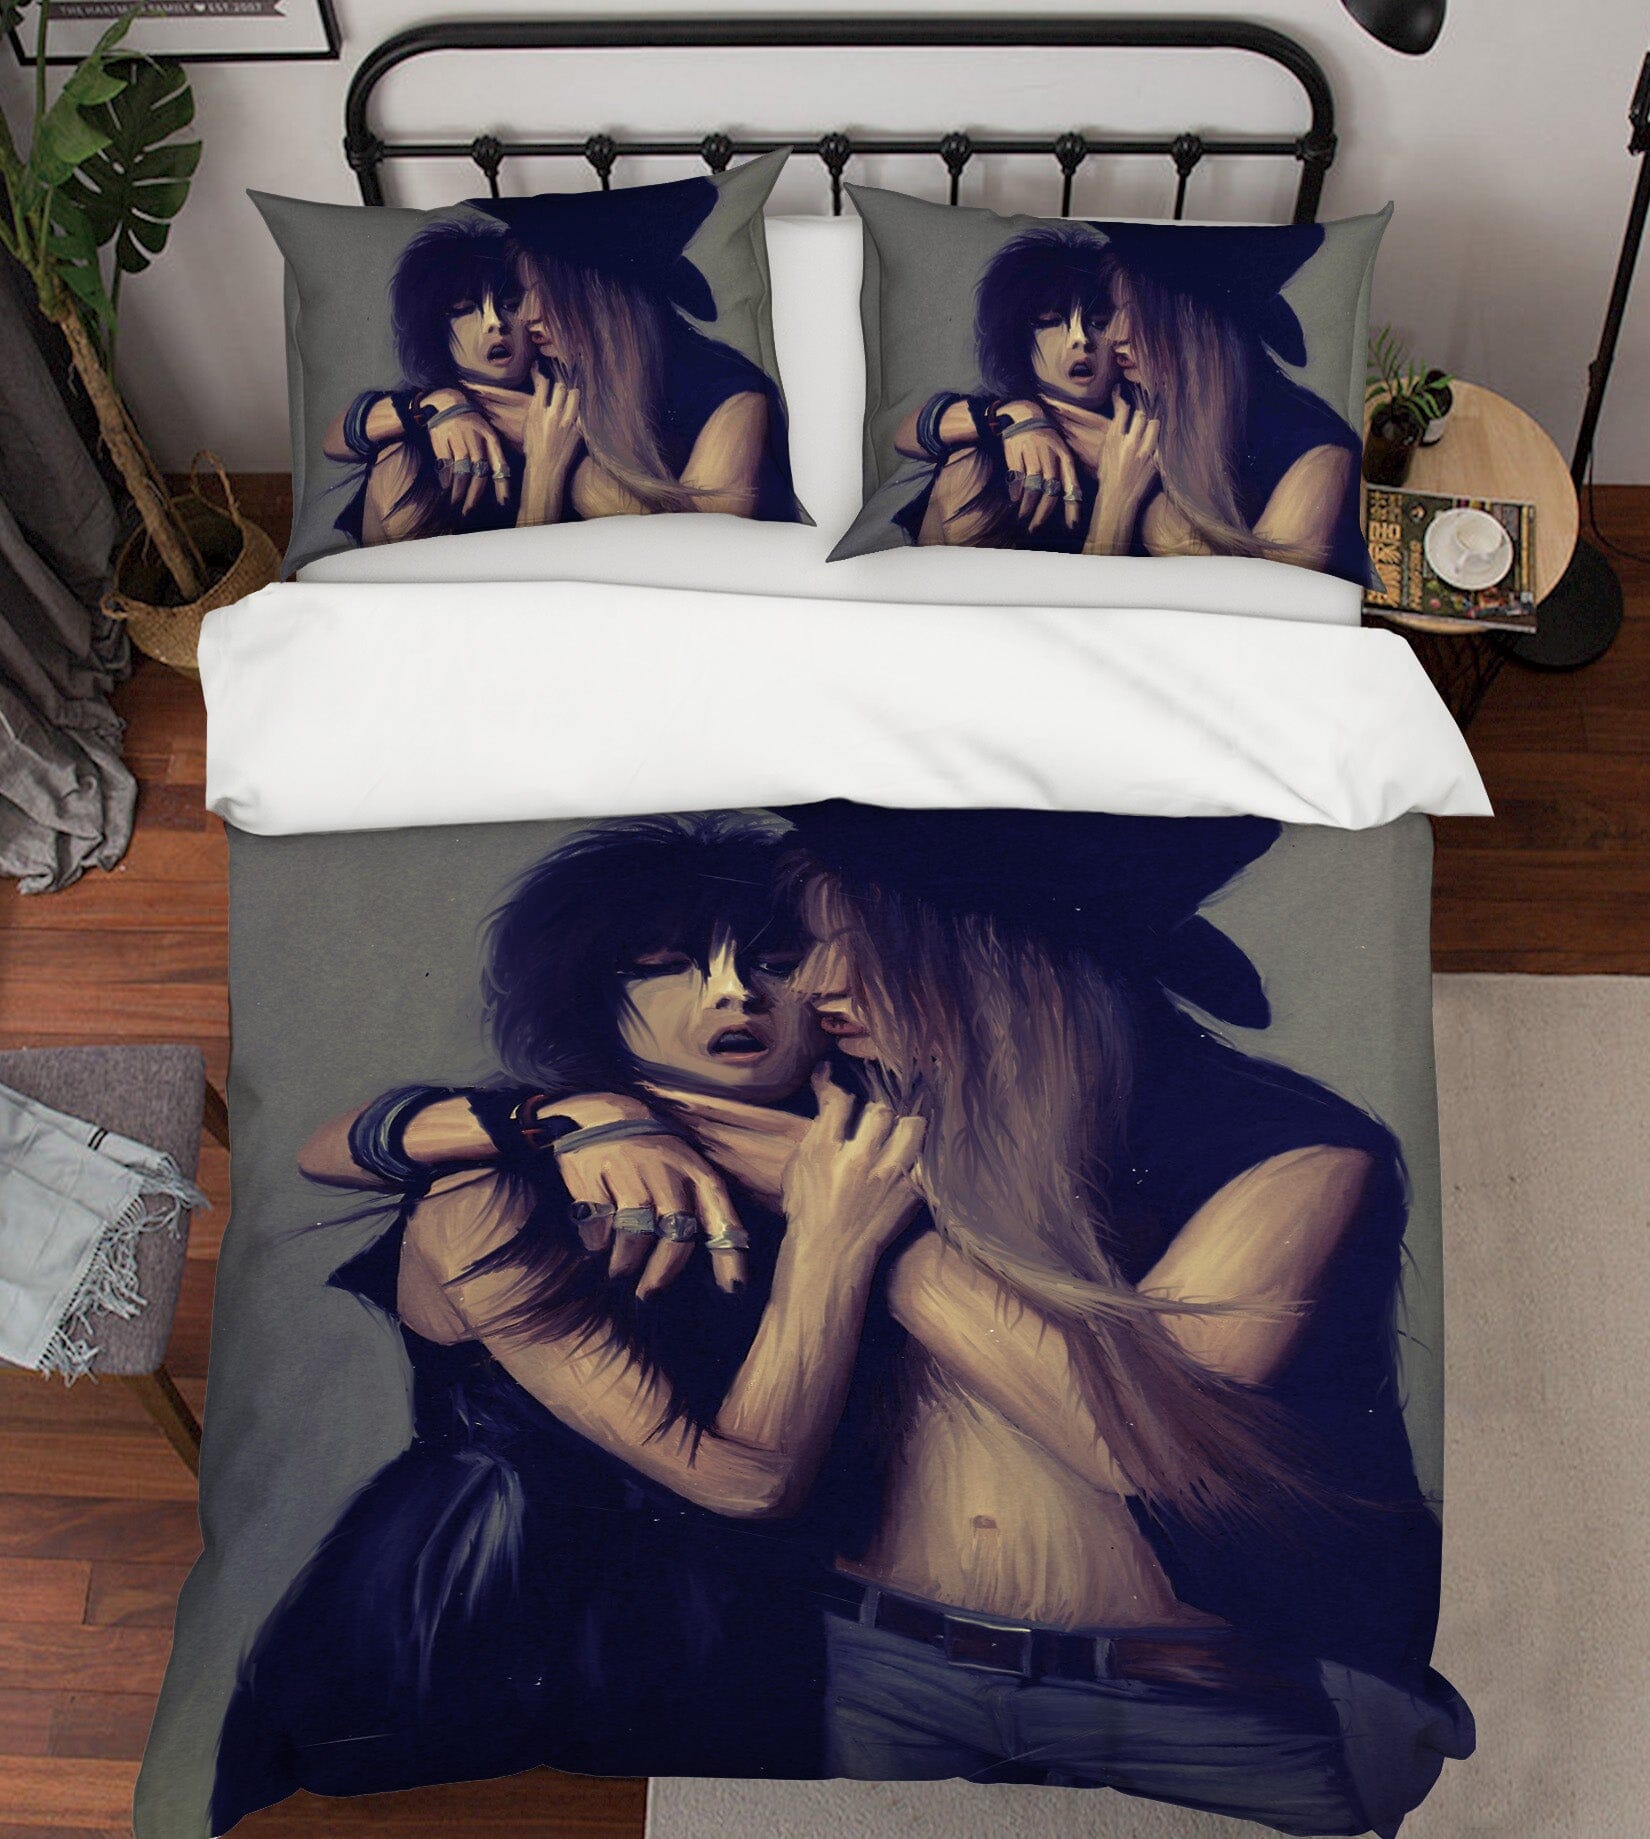 3D Hug And Kiss 2010 Marco Cavazzana Bedding Bed Pillowcases Quilt Quiet Covers AJ Creativity Home 